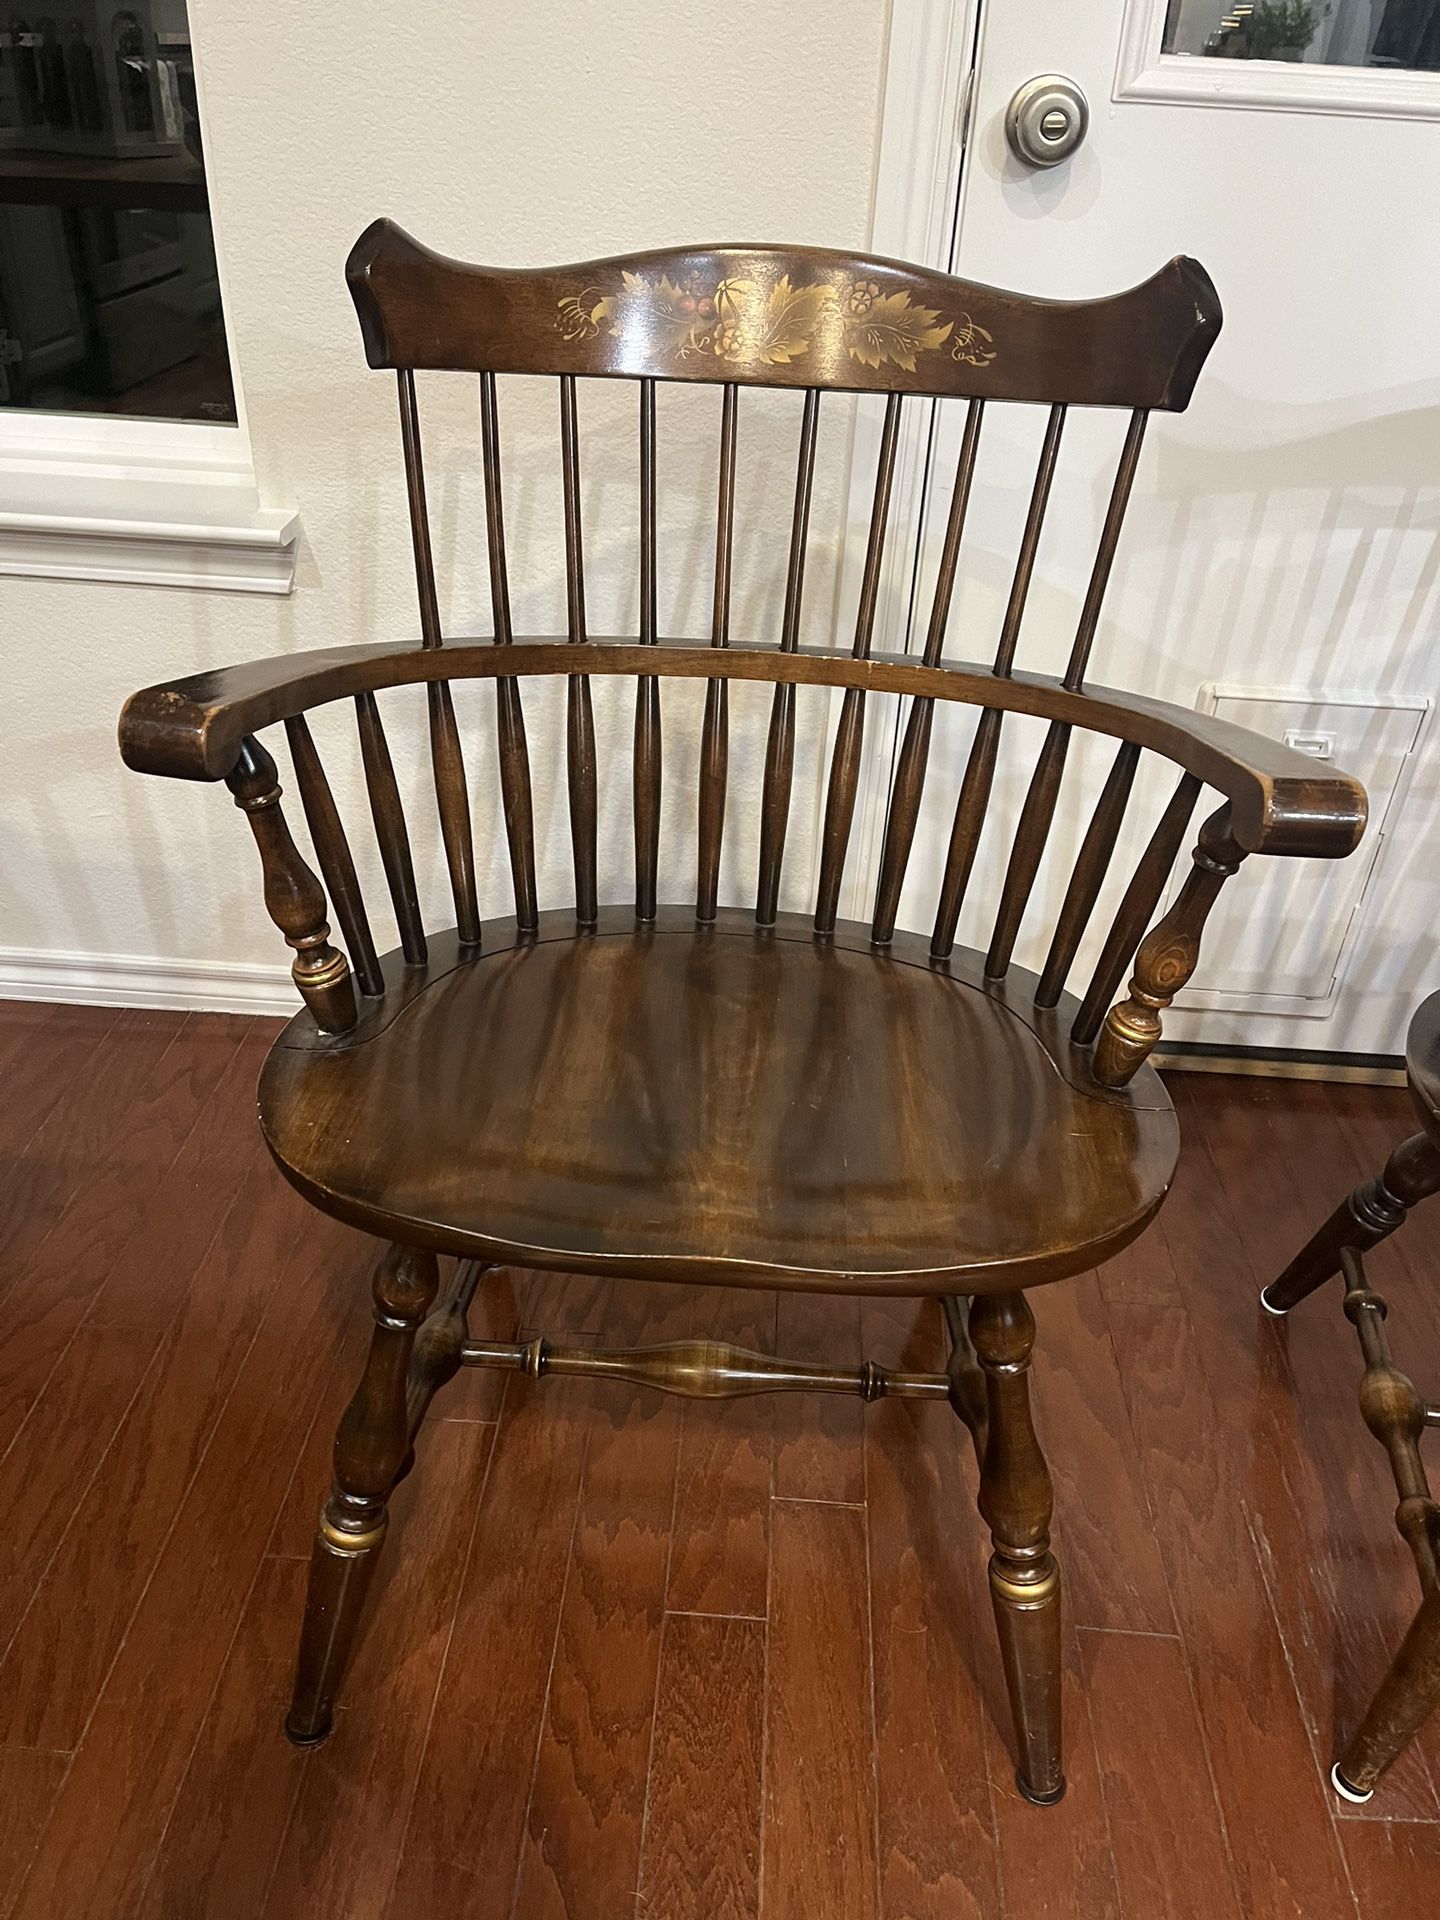 Pair Of Wooden Barrel Chairs